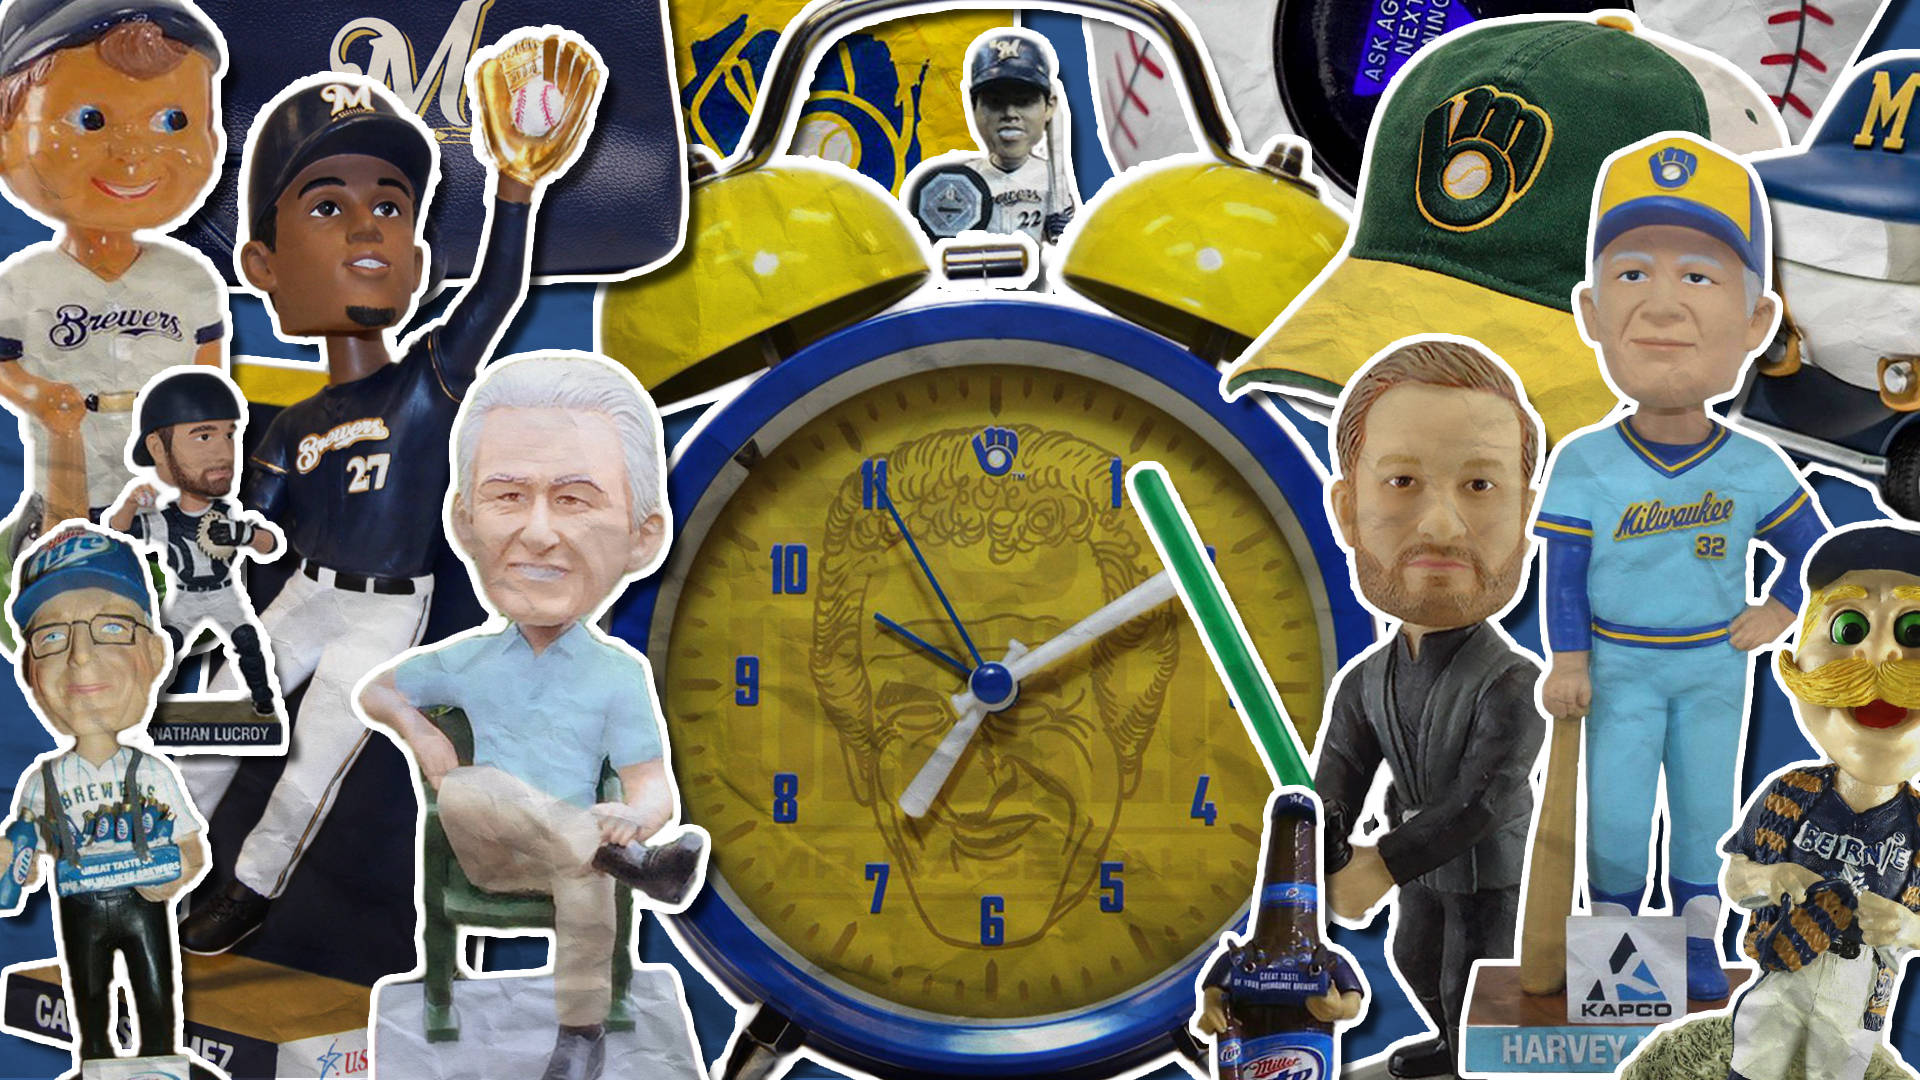 Milwaukee Brewers Bobbleheads Collage